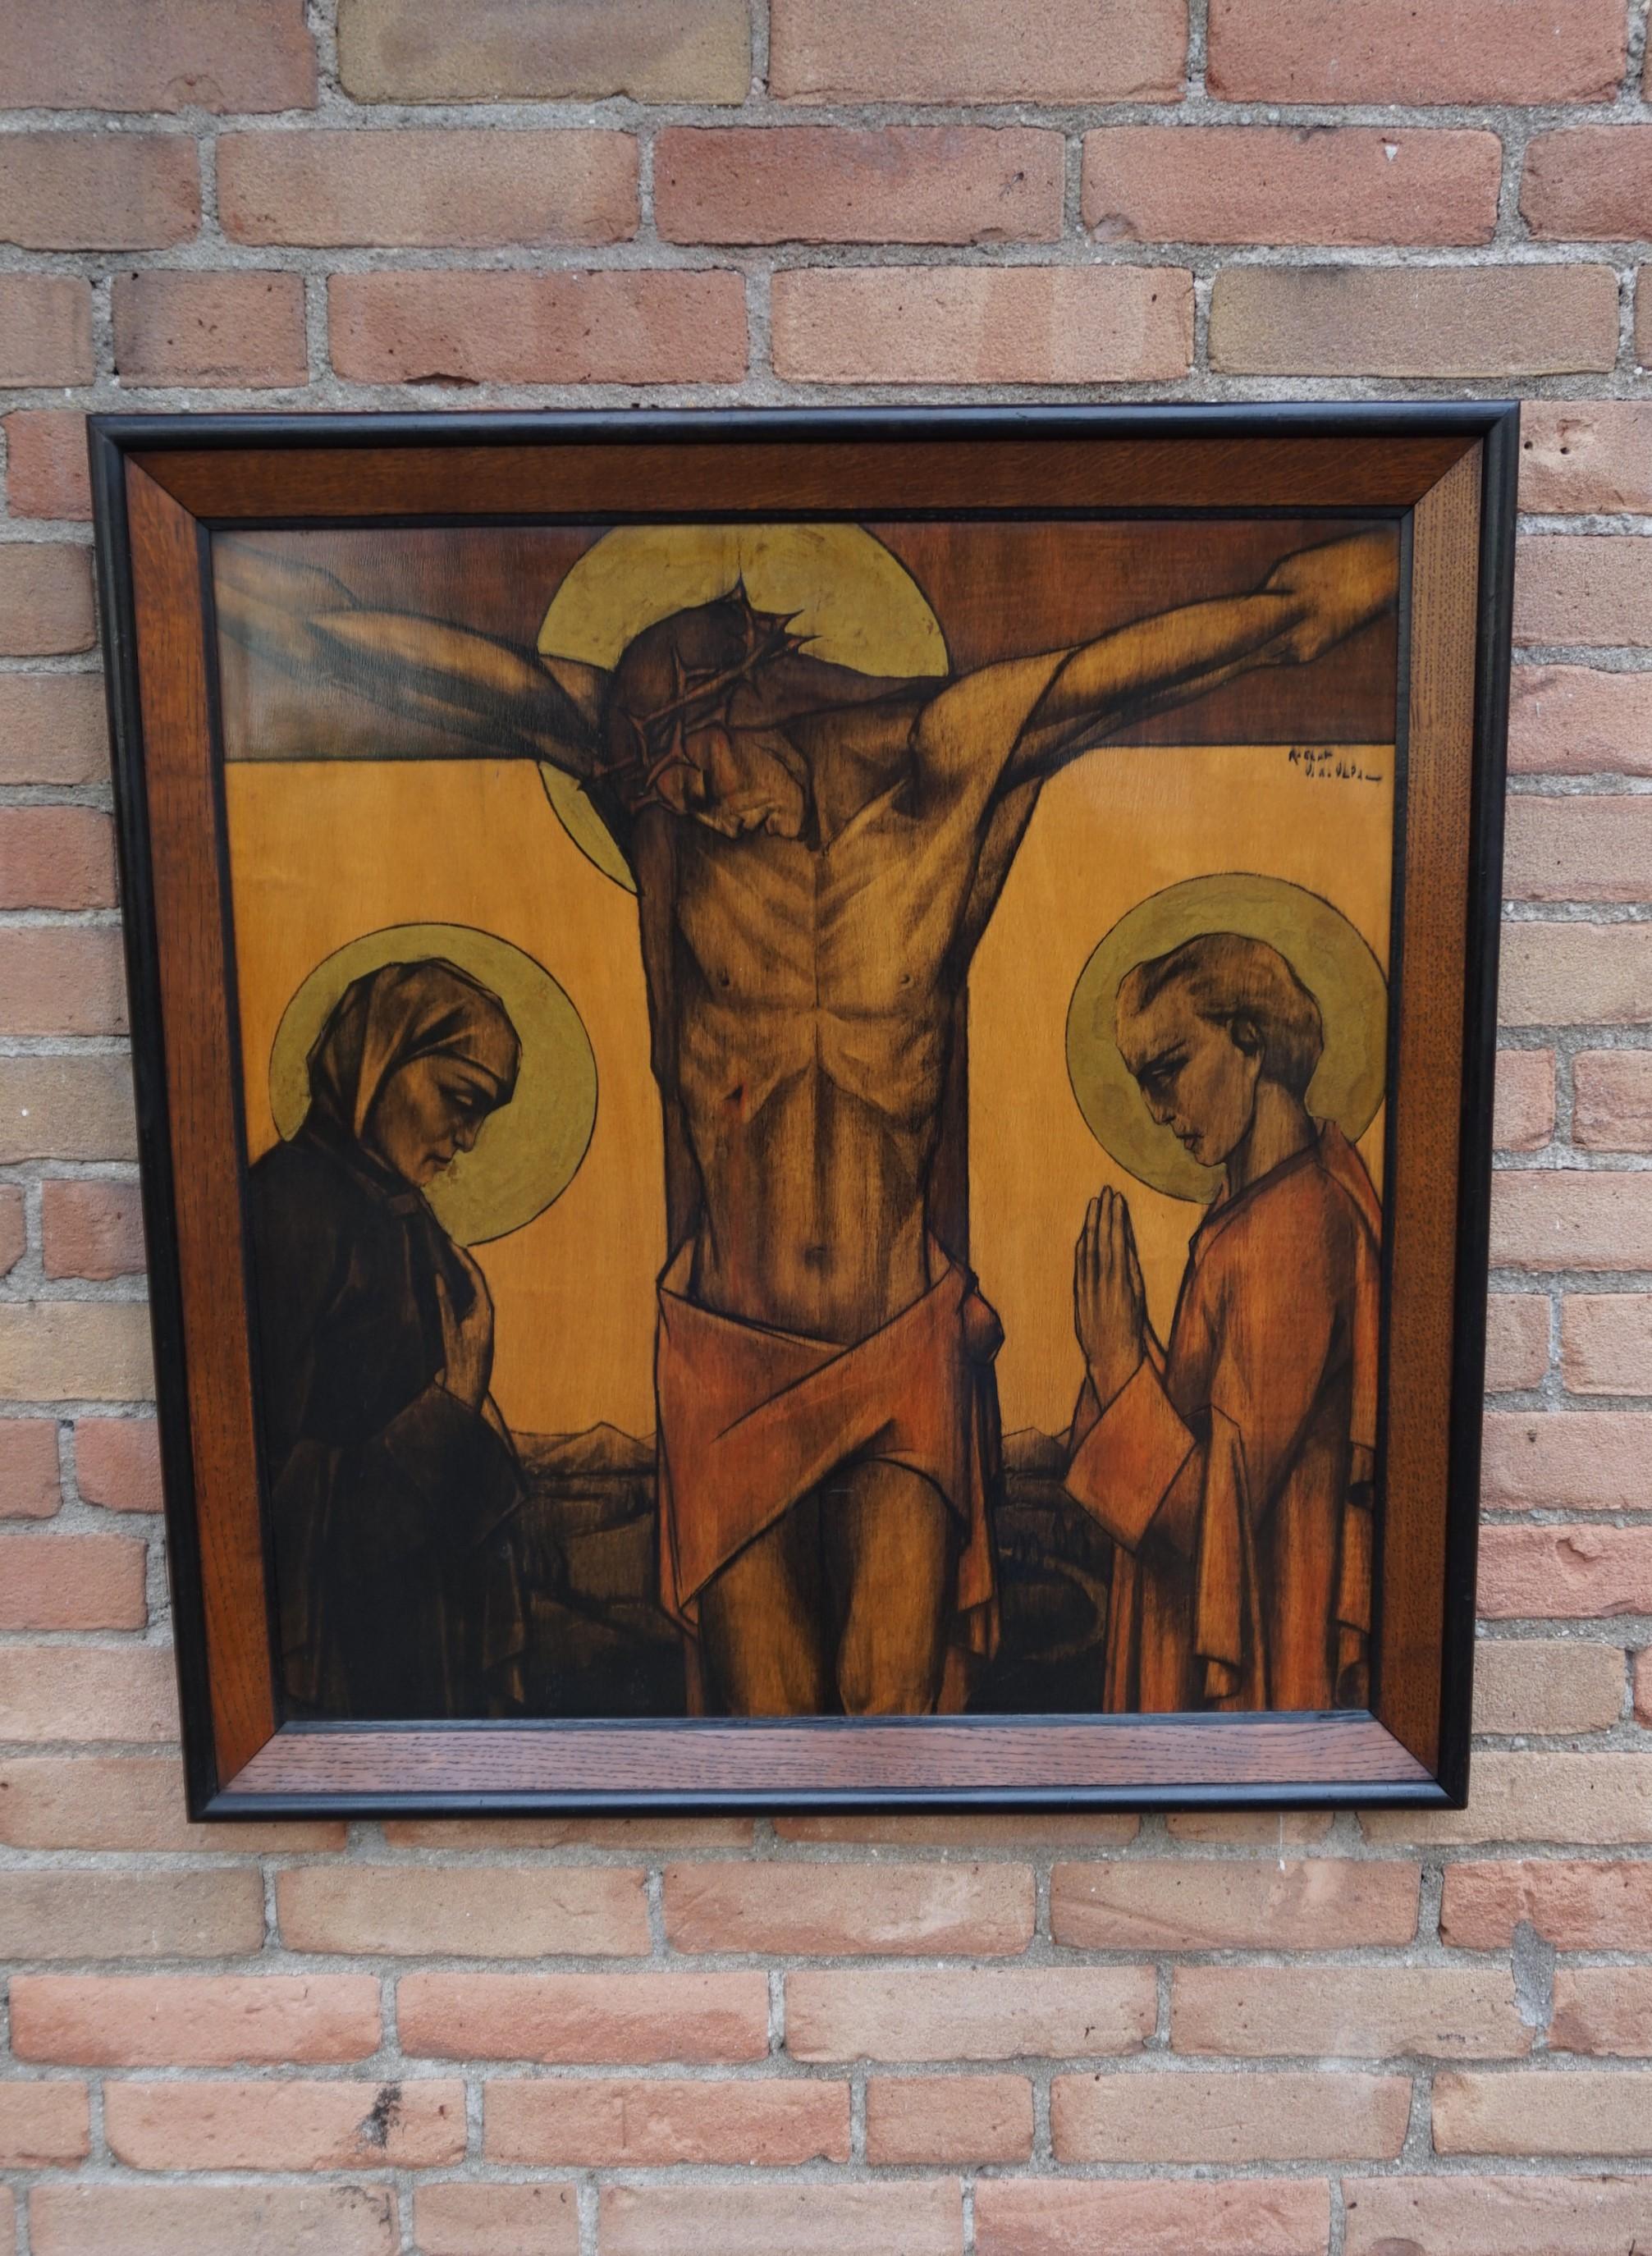 Unique and beautifully stylized, Art Deco work of religious art.

Over the centuries this famous religious scene has inspired many great artists to create their own interpretation. For us to have been able to acquire this unique and top quality Art